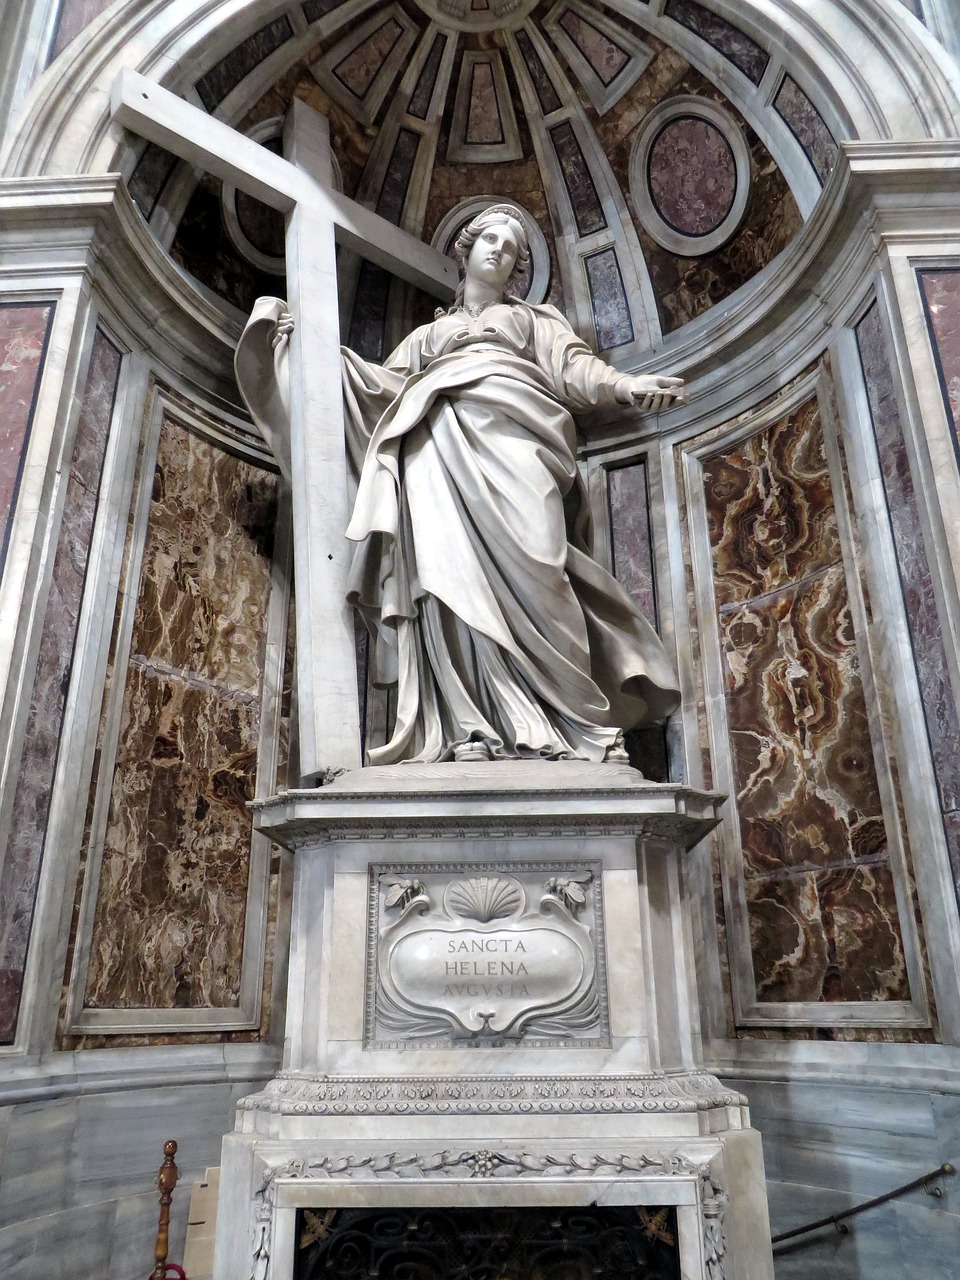 St helena,st peter's basilica,rome,vatican,statue - free image from ...